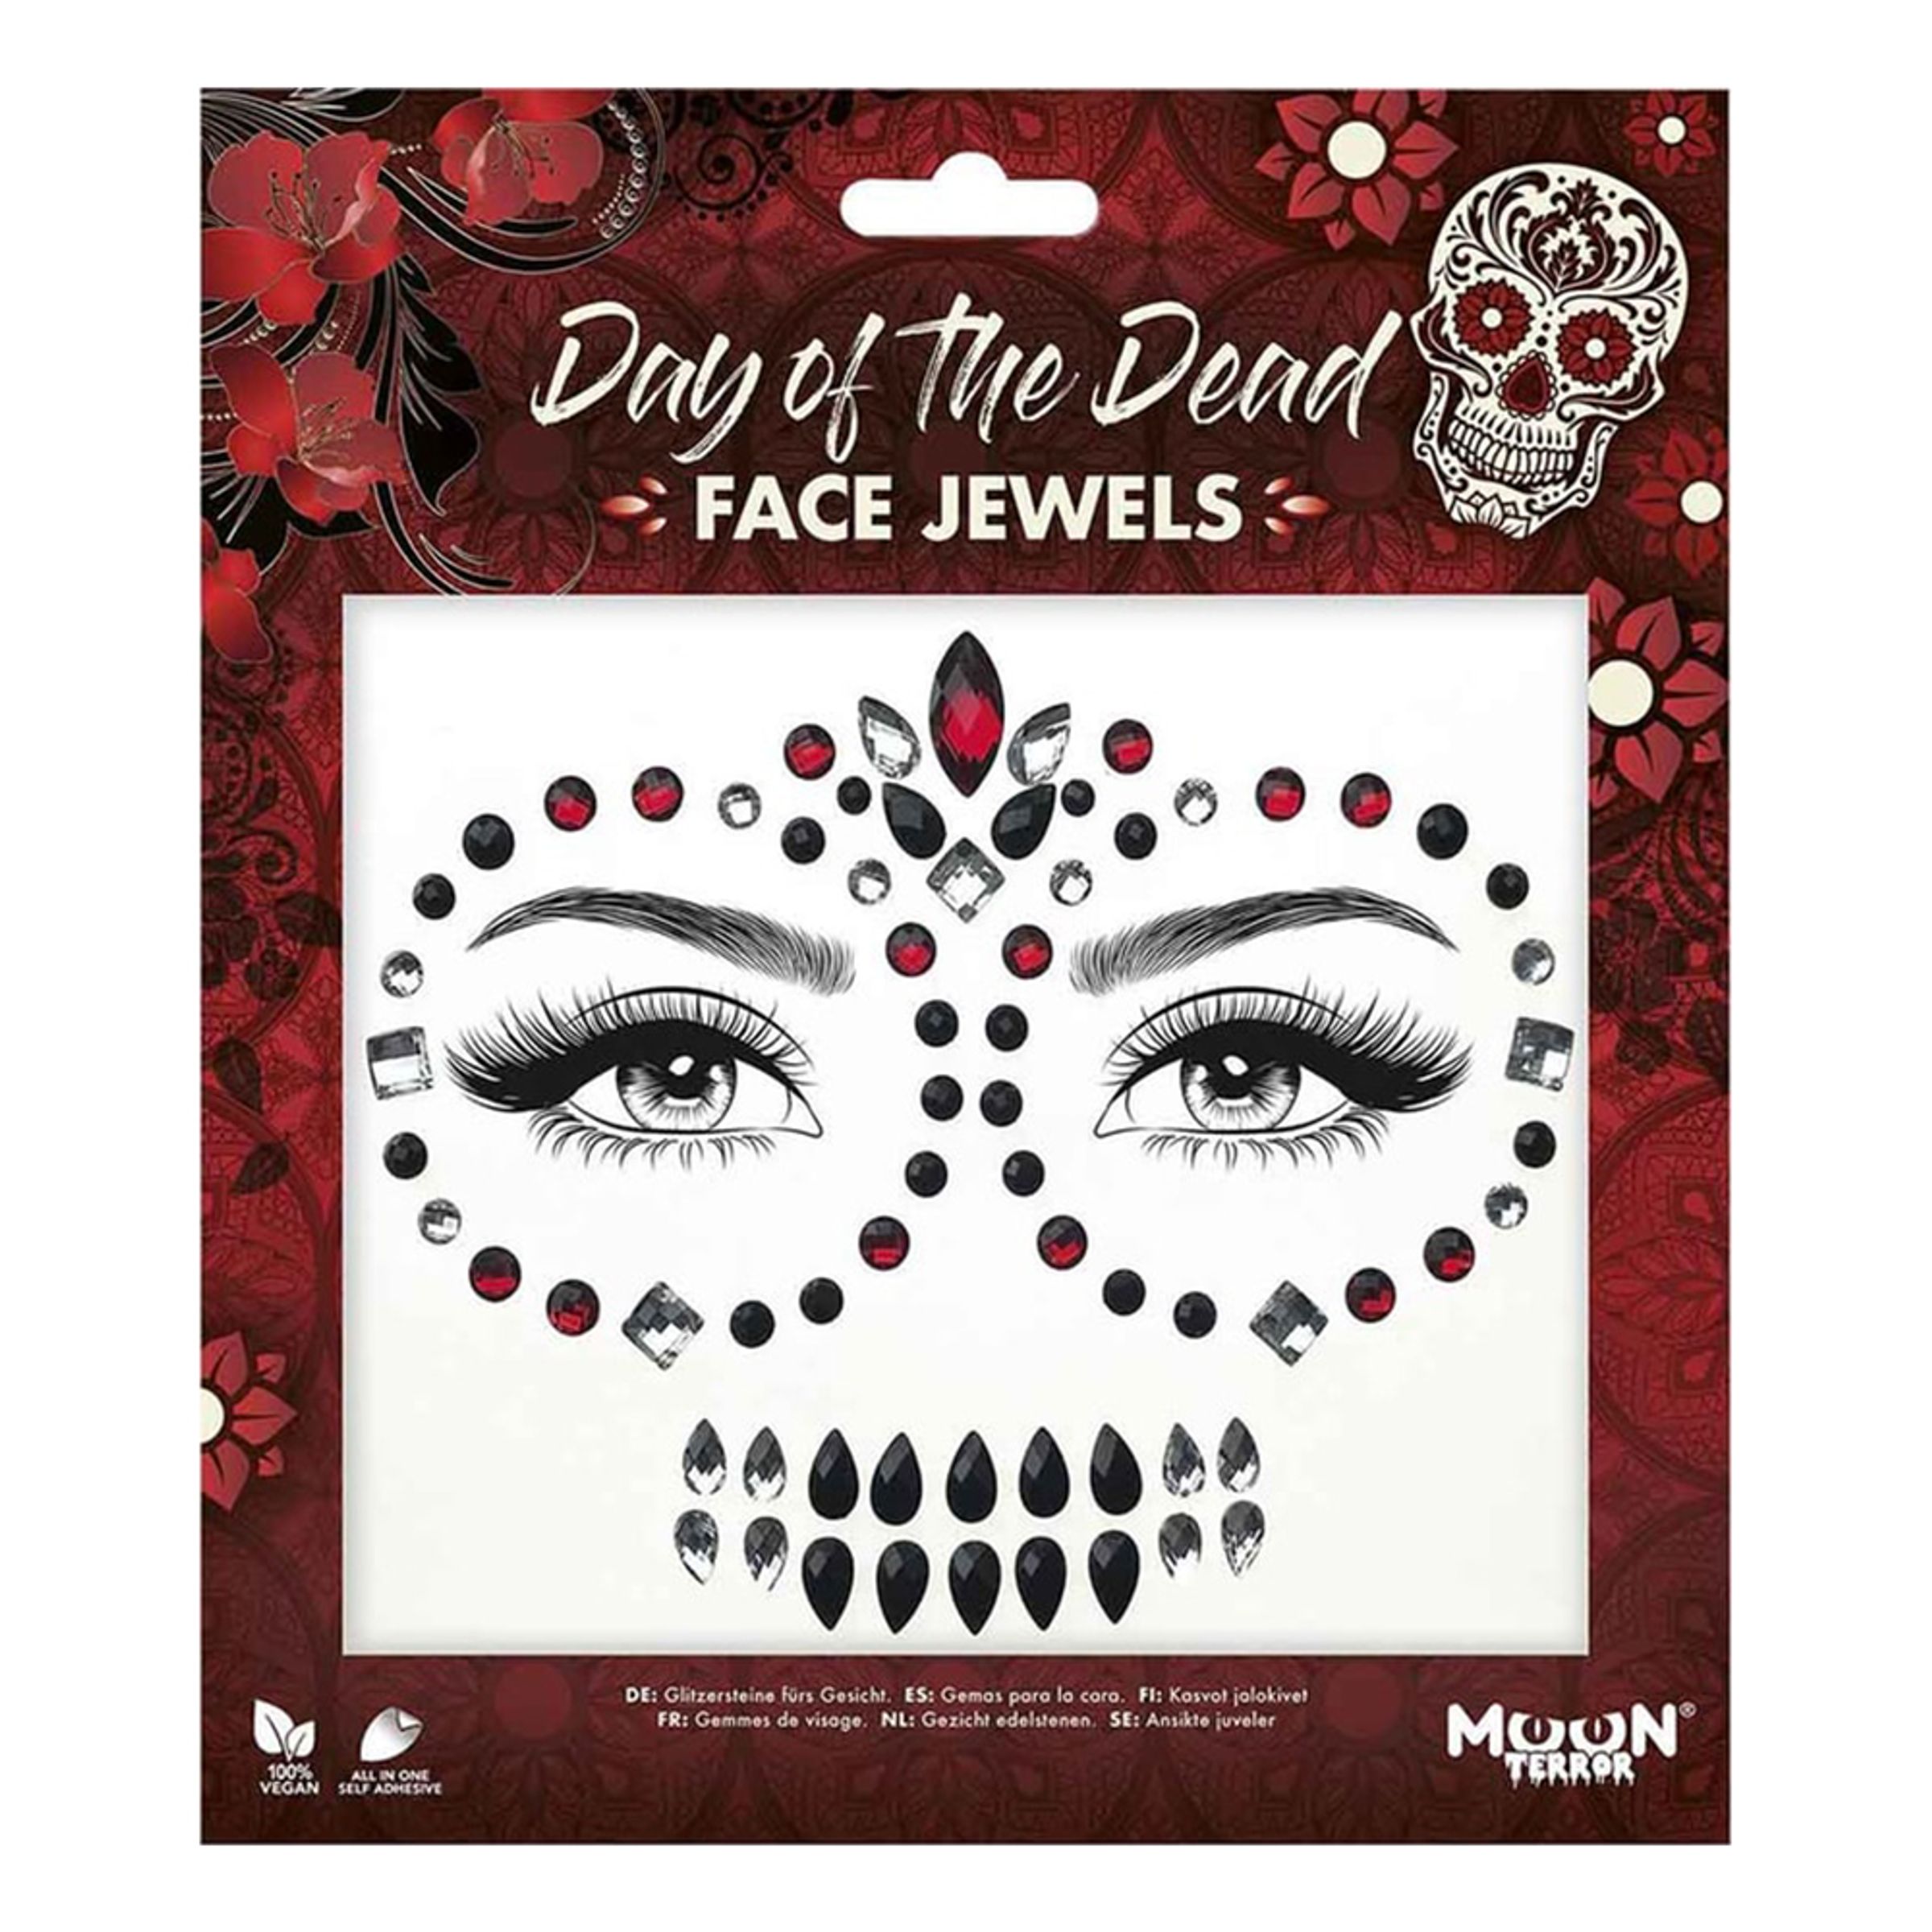 Läs mer om Face Jewels Day of the Dead